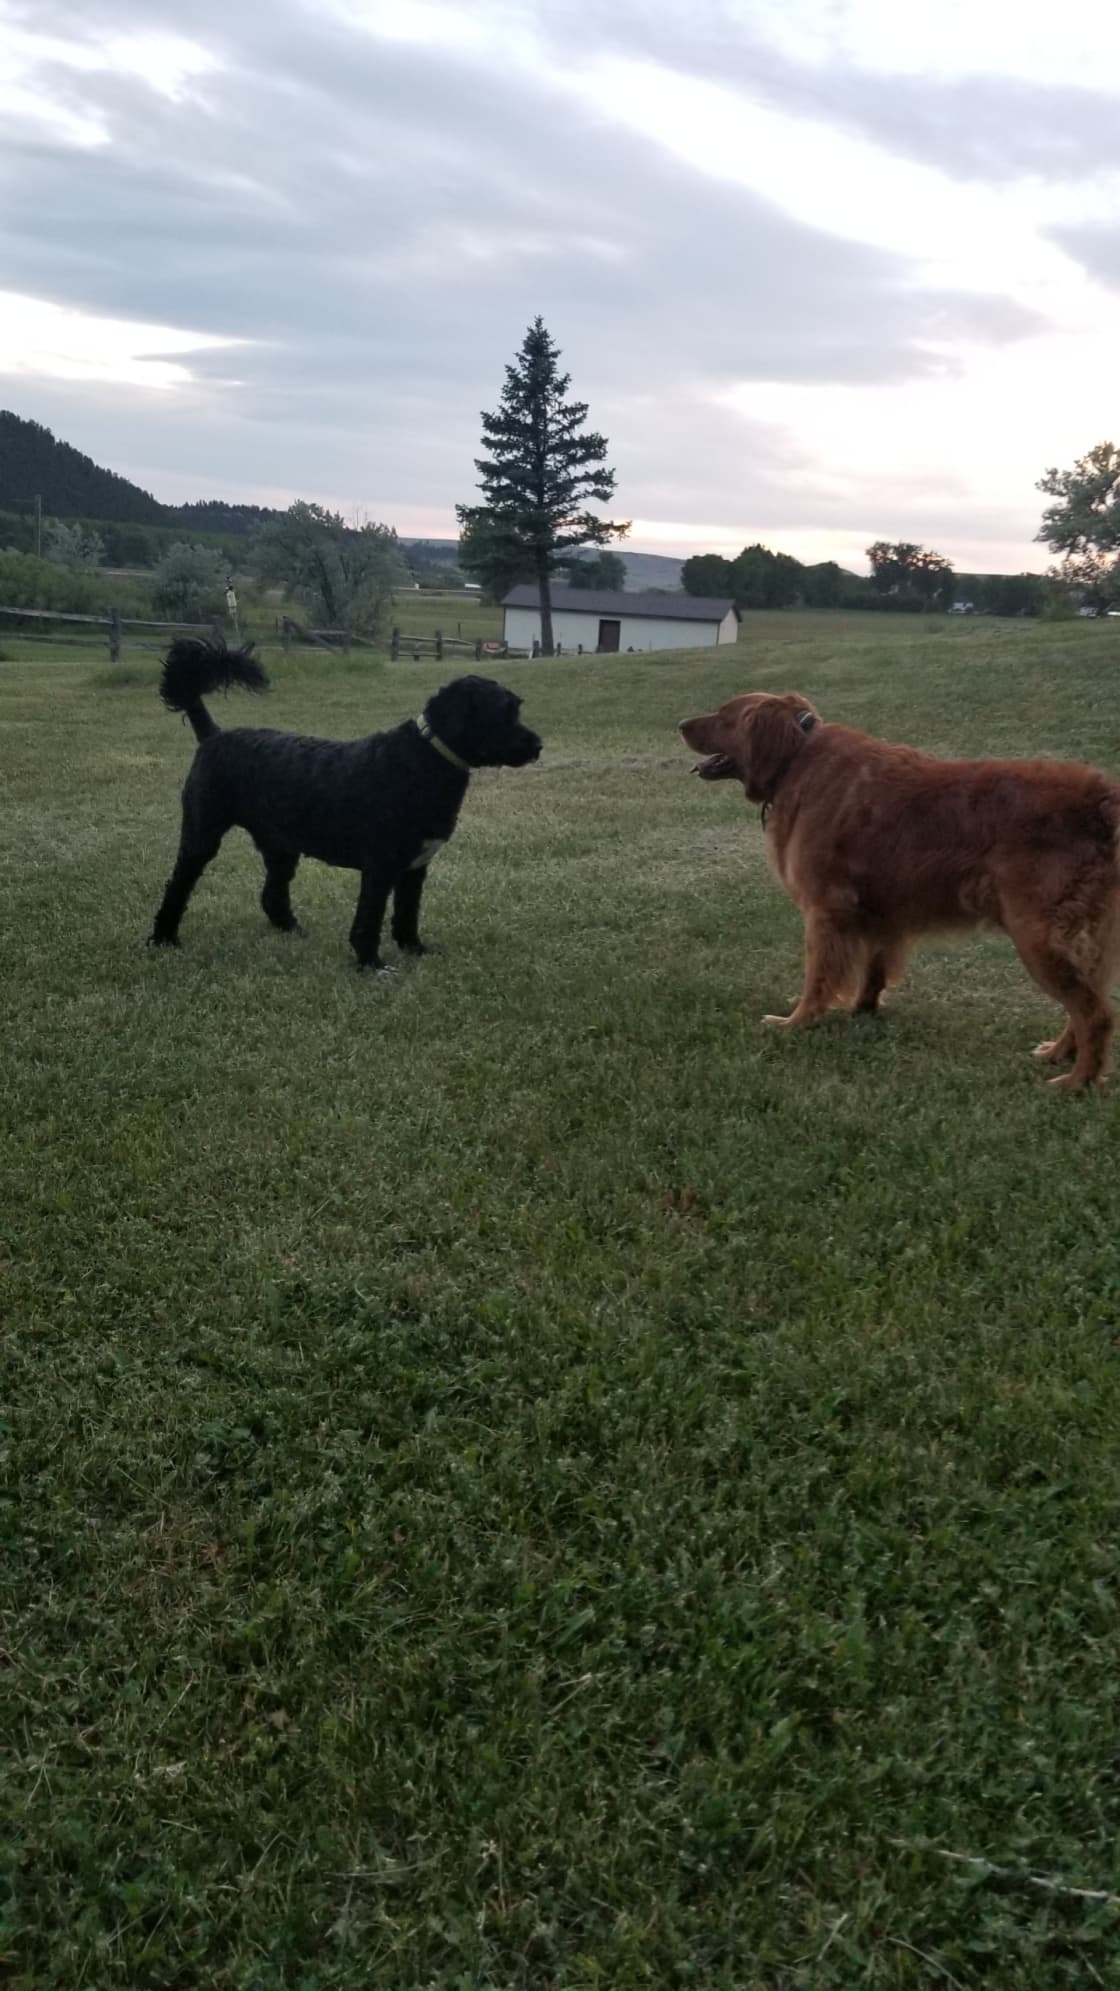 Our golden retriever, Sand, playing with another hipcamper!